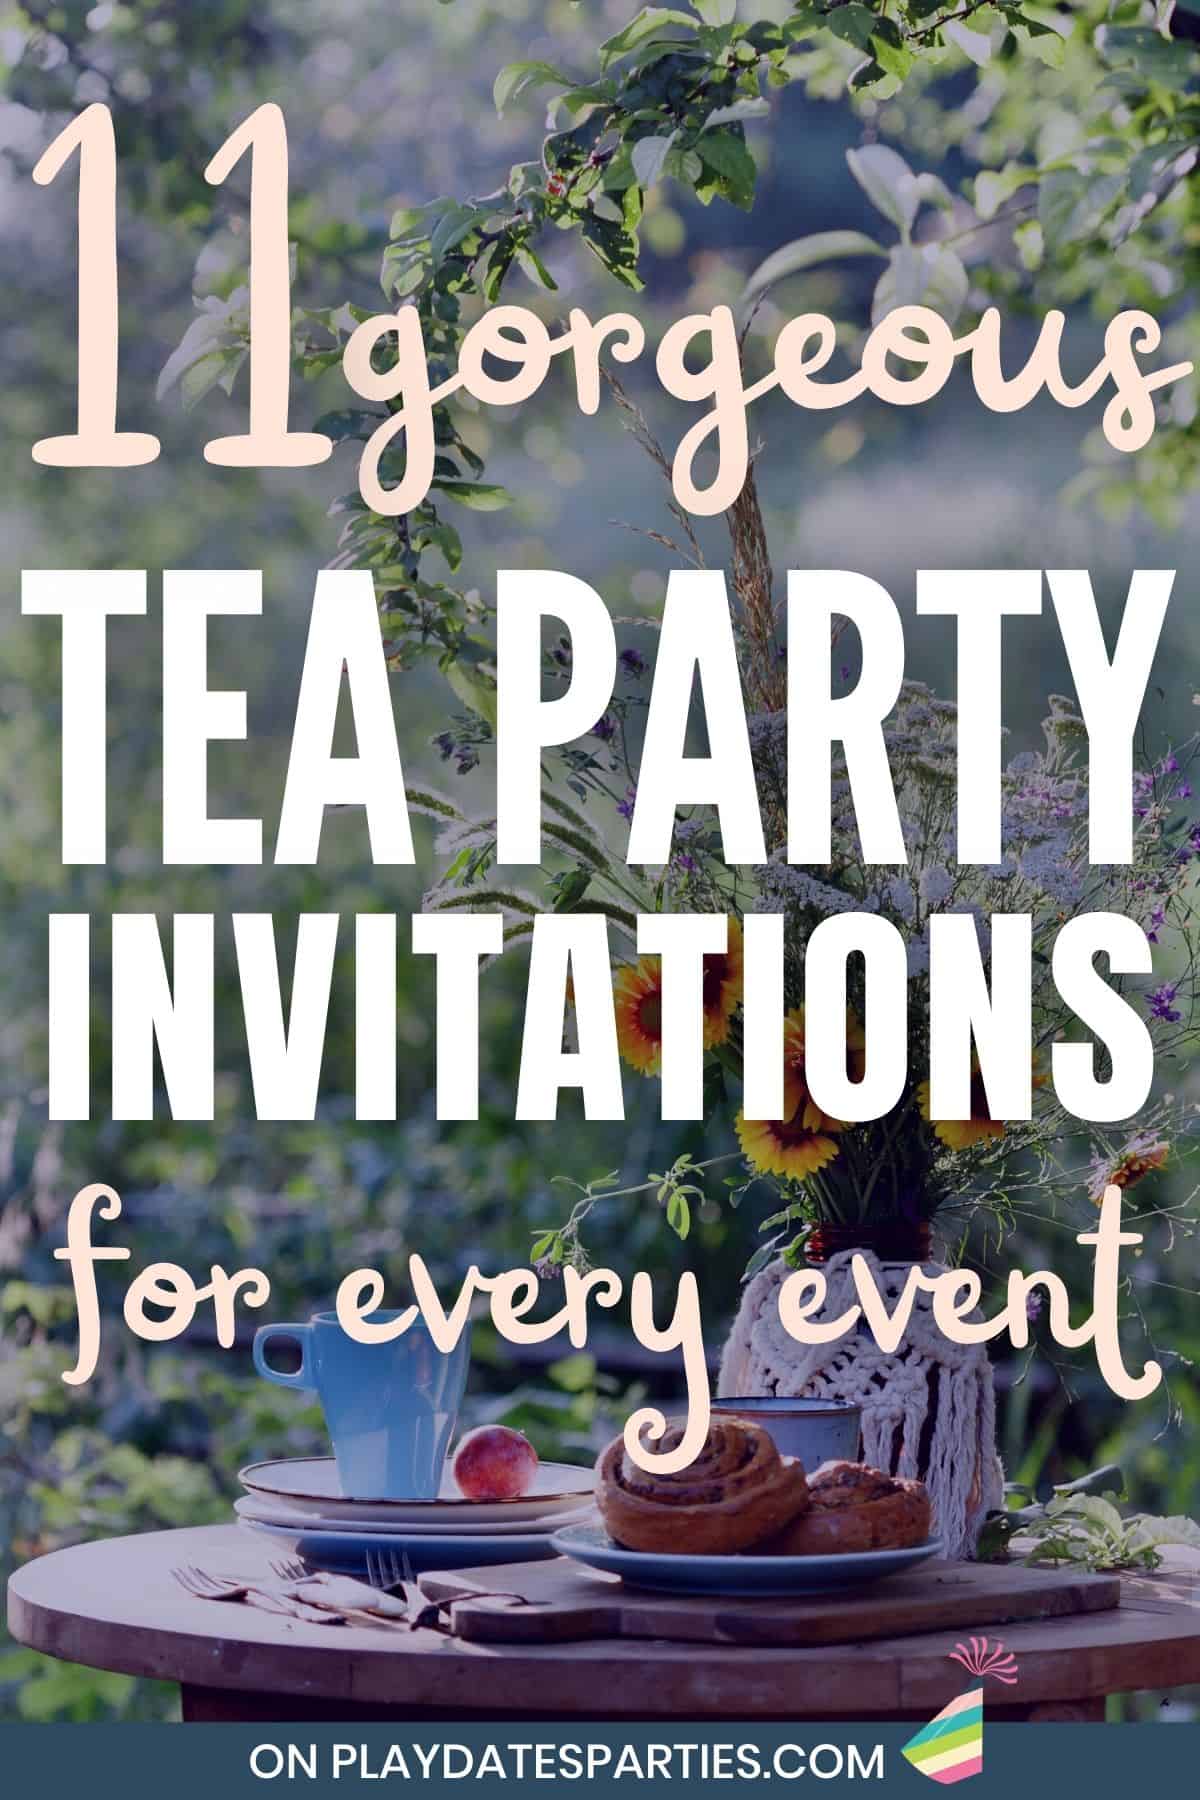 A tea party set up with text overlay 11 gorgeous tea party invitations.